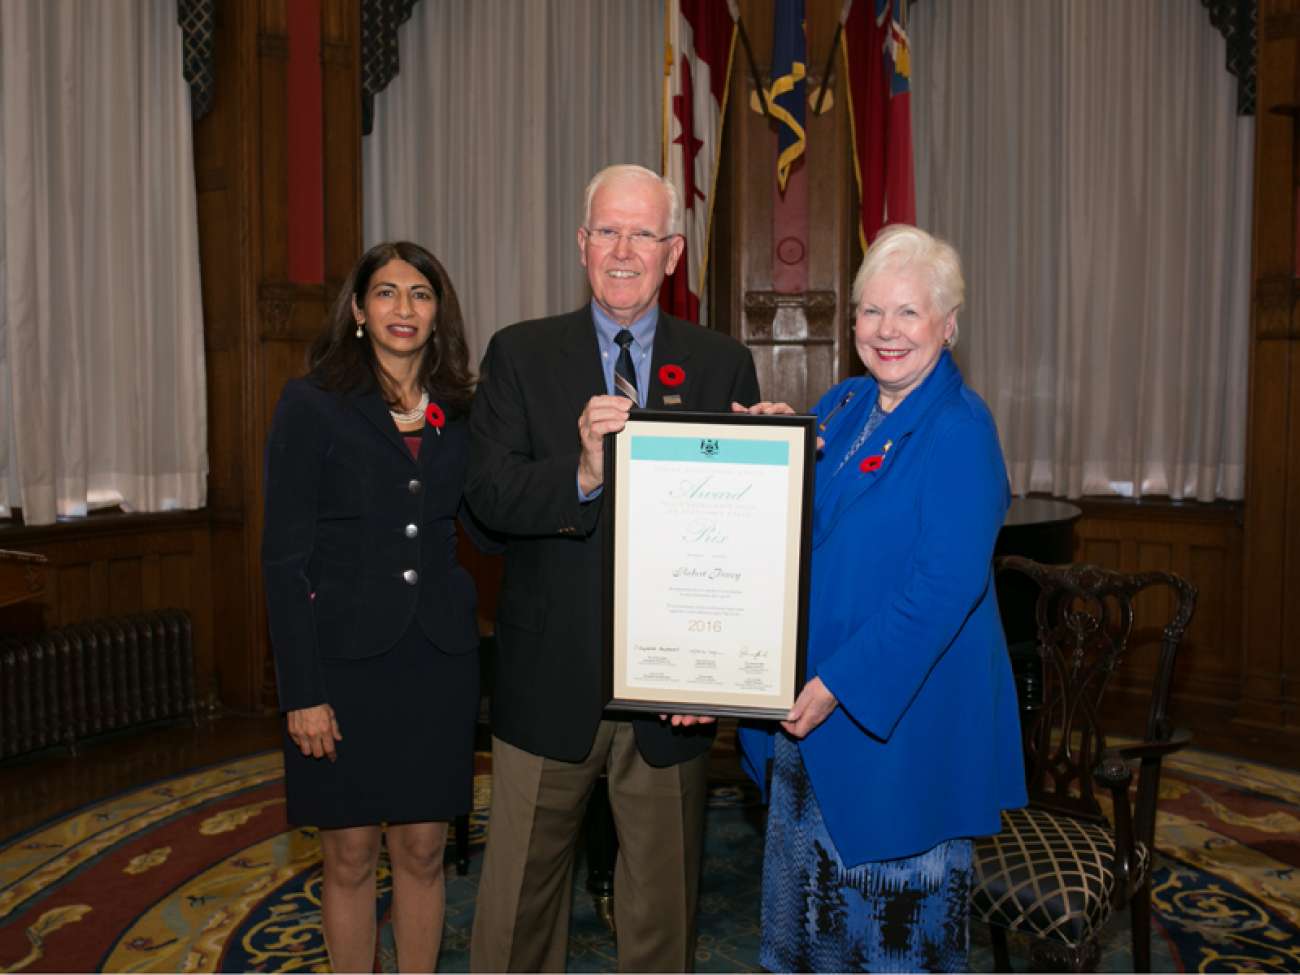 Robert Povey receives his award from the Hon. Dipika Damerla, Minister Responsible for Seniors Affairs (left) and the Hon. Elizabeth Dowdeswell, Lieutenant Governor of Ontario (right). Photo courtesy of the Government of Ontario.